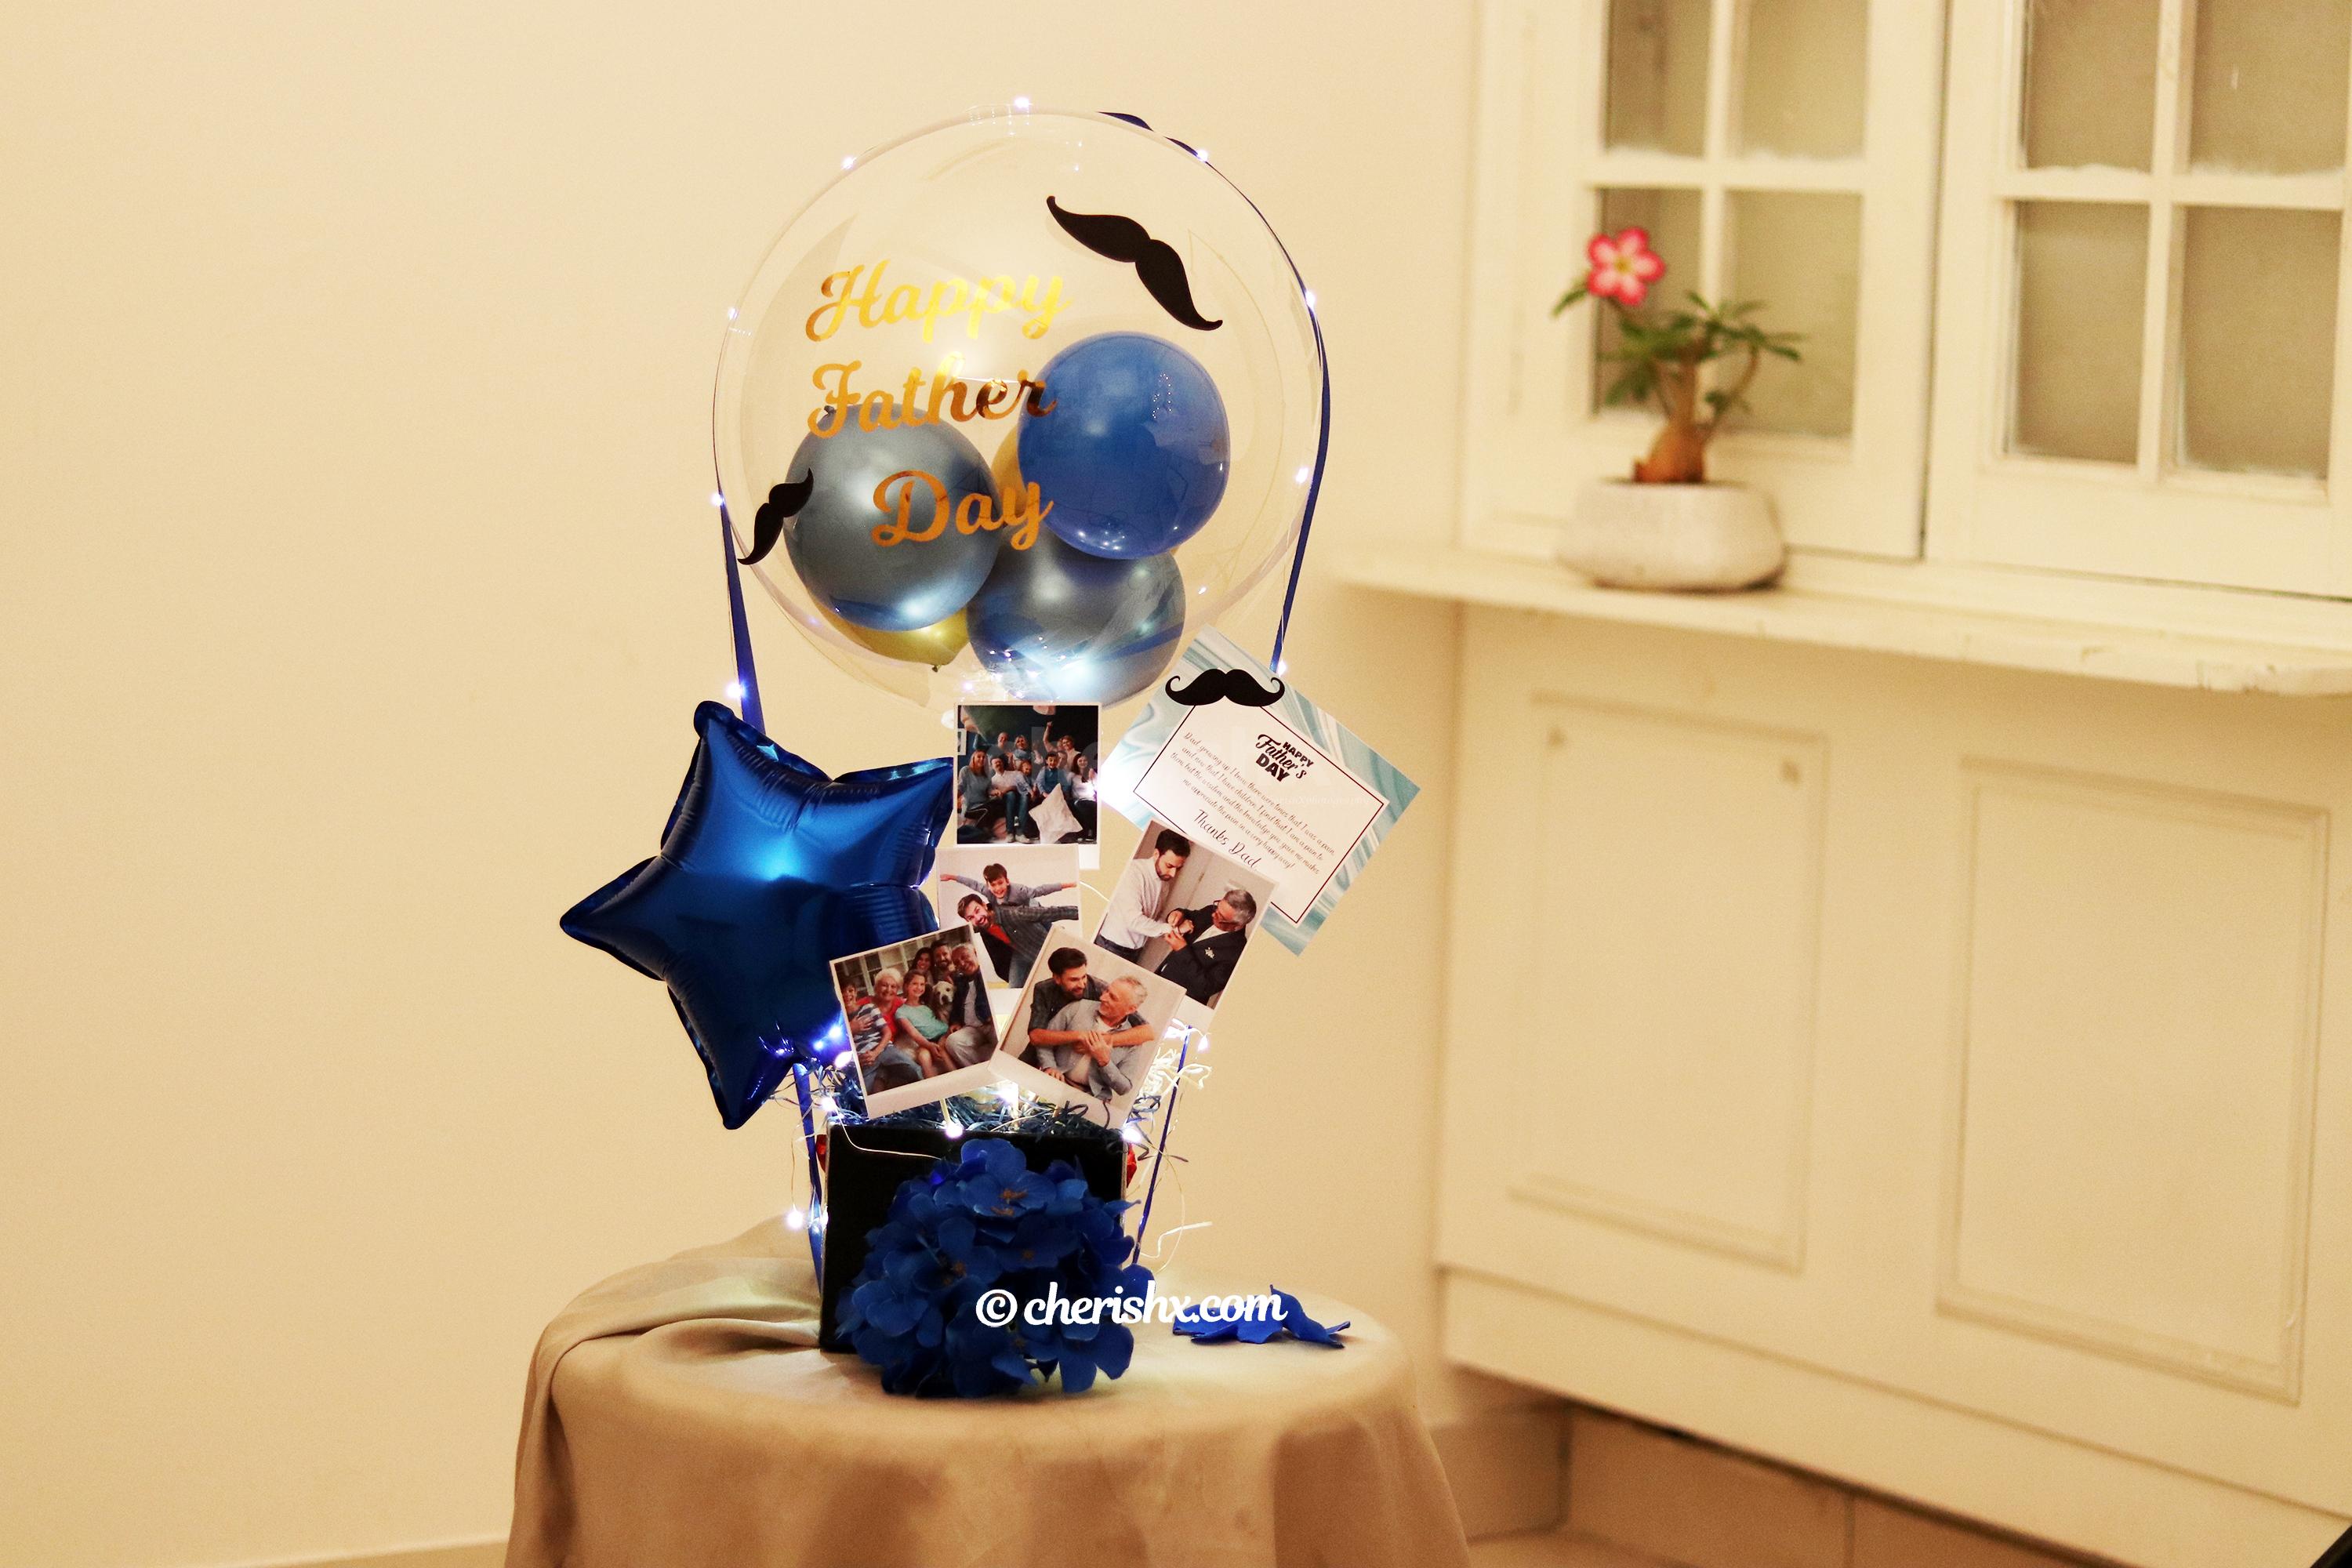 CherishX offers you this wondrous Blue & Gold Father’s Day Bucket to make him feel extra special!